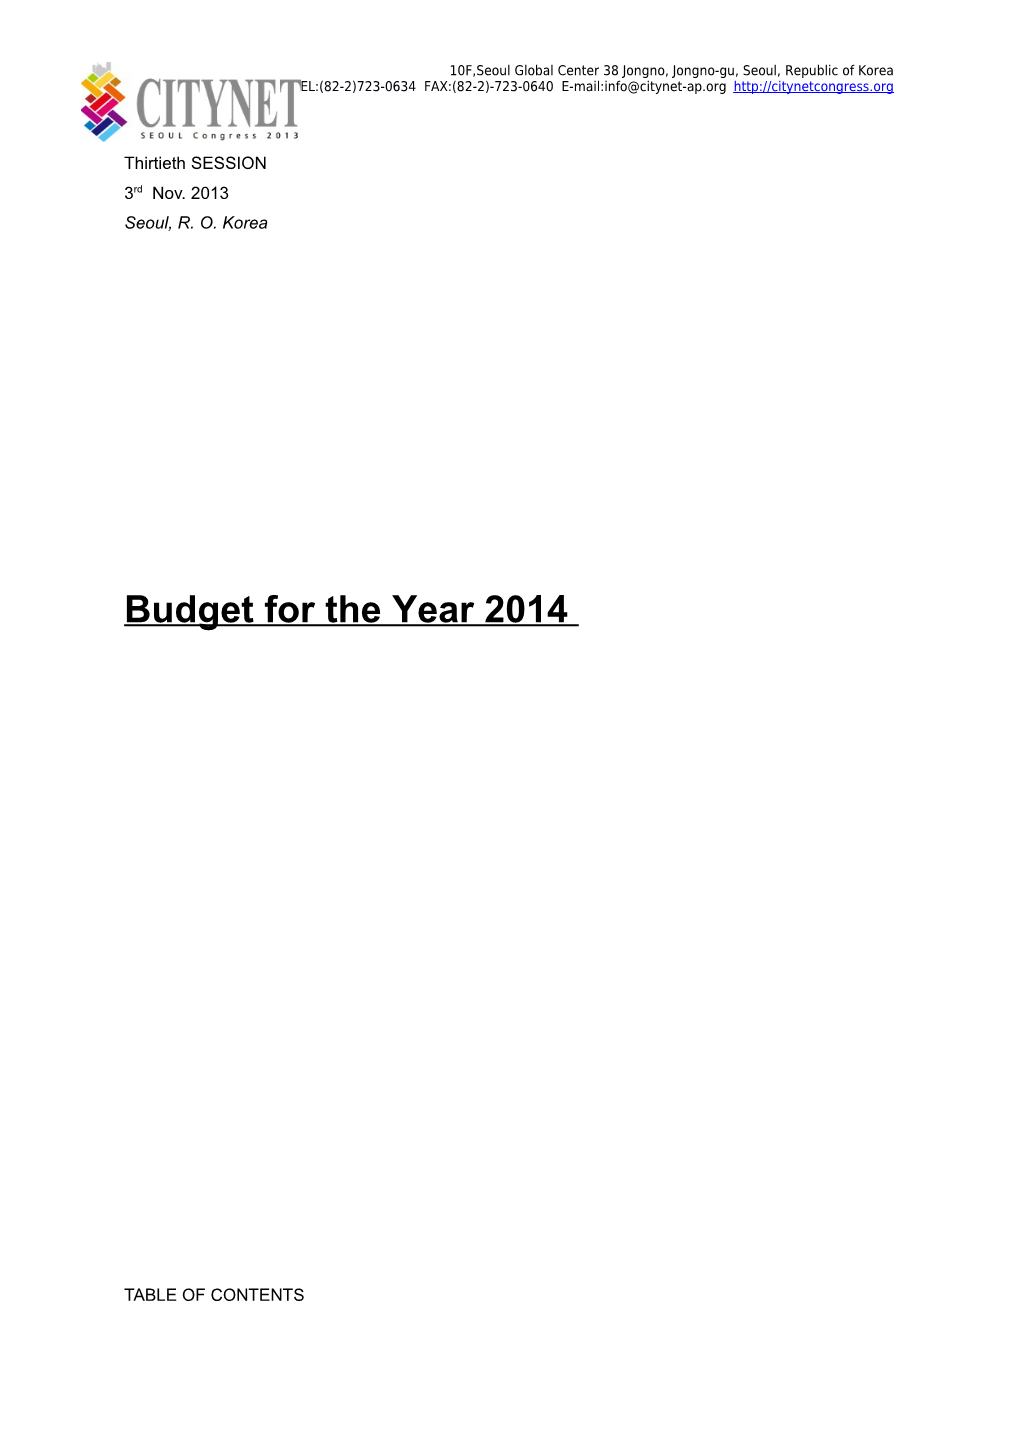 Budget for the Year 2014